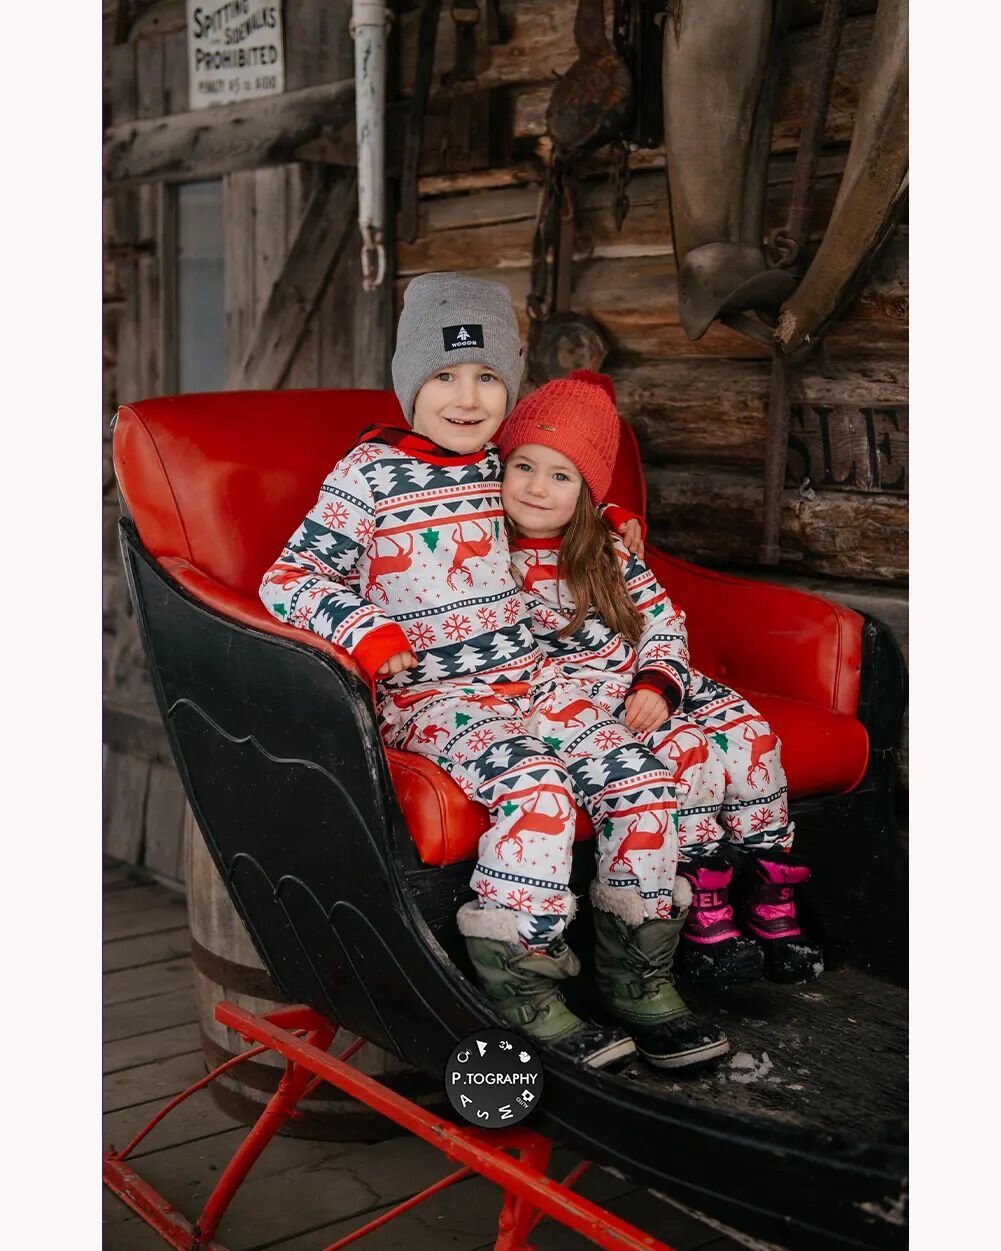 🎶Welcome to the Jingle
We got one horse open sleighs! 🎶

Cabin minis are still active, sleigh rides booking into January!

#familyphotography #salmonarmfamilyphotographer #siblings #brother #sister #hugs #sleighride #merrychristmas #christmas #pjs 